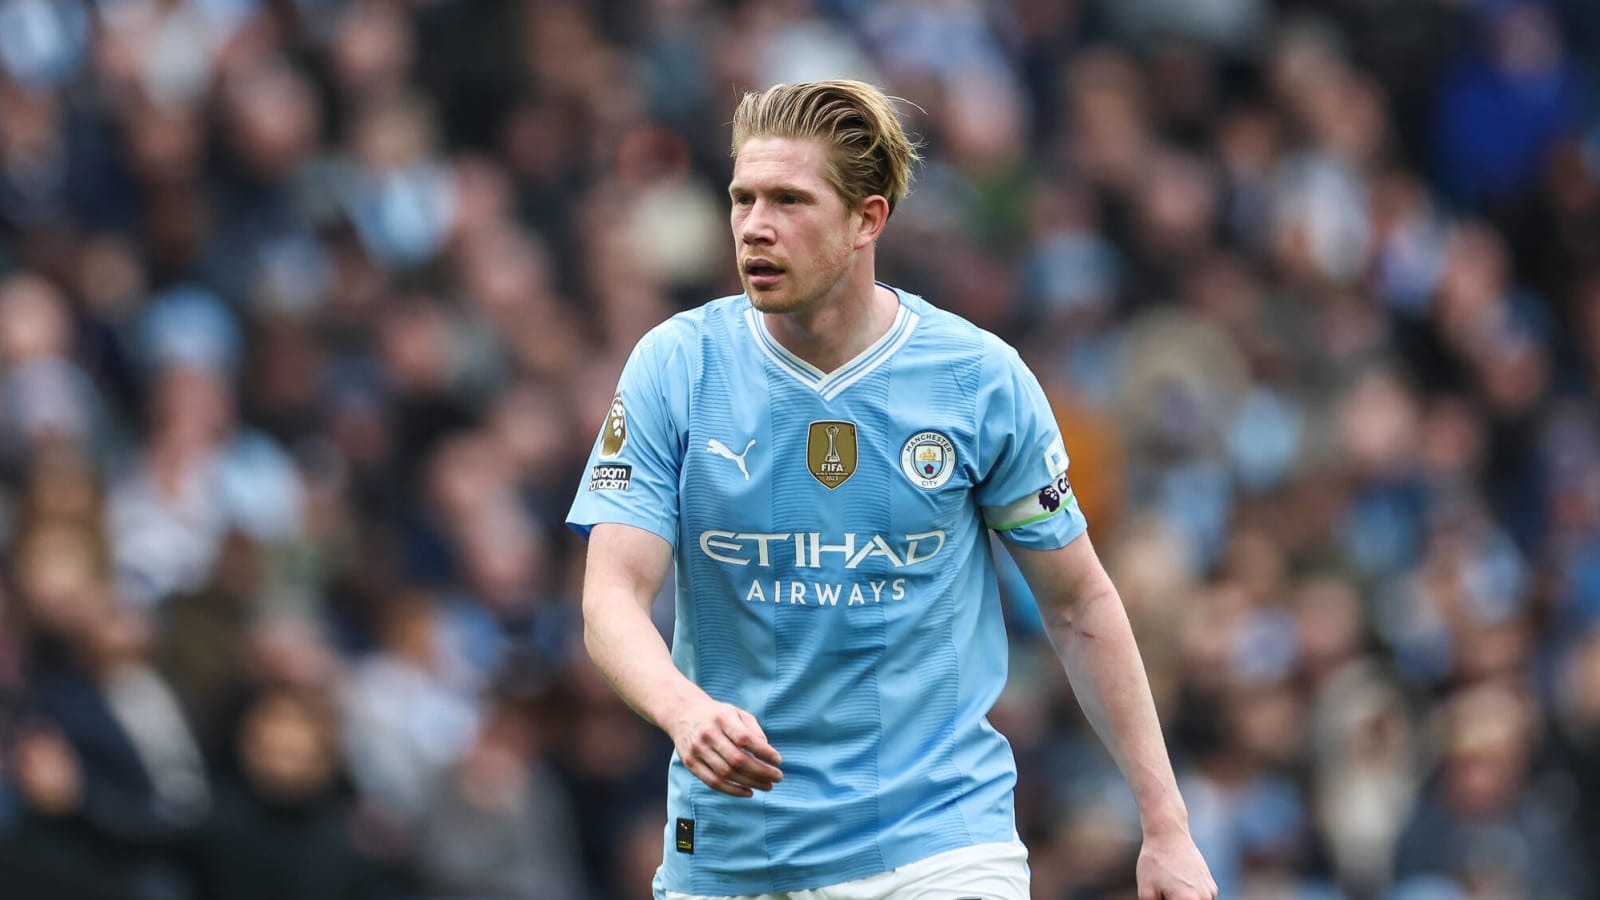 Kevin De Bruyne misses the Manchester City starting lineup for Real Madrid clash due to illness